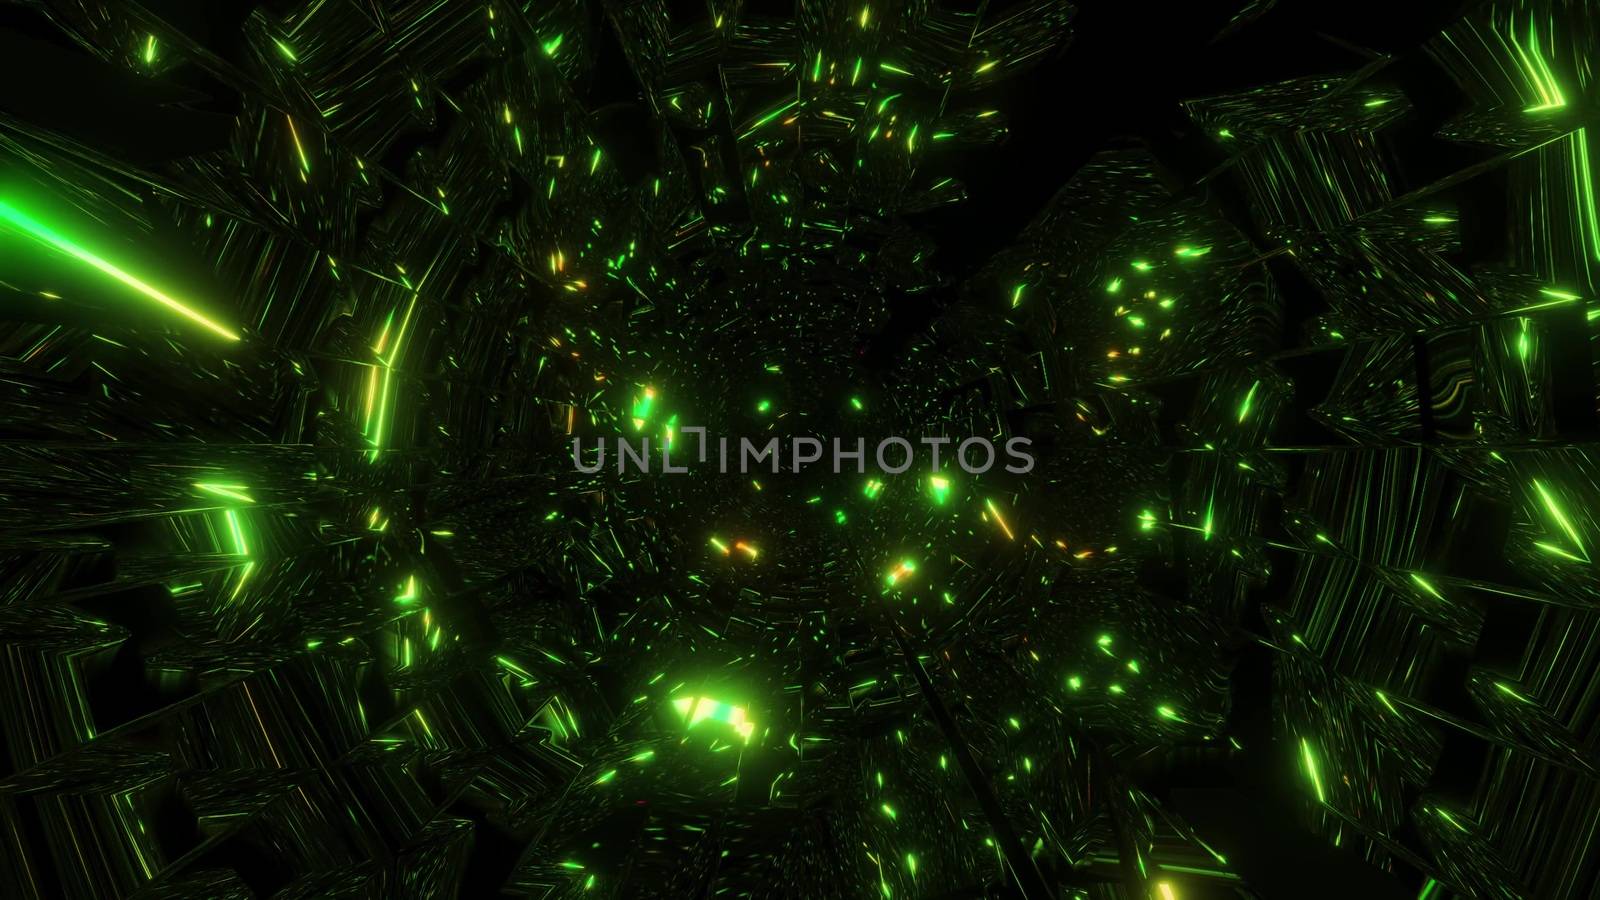 highly abstract green glowing design background wallpaper 3d illustration